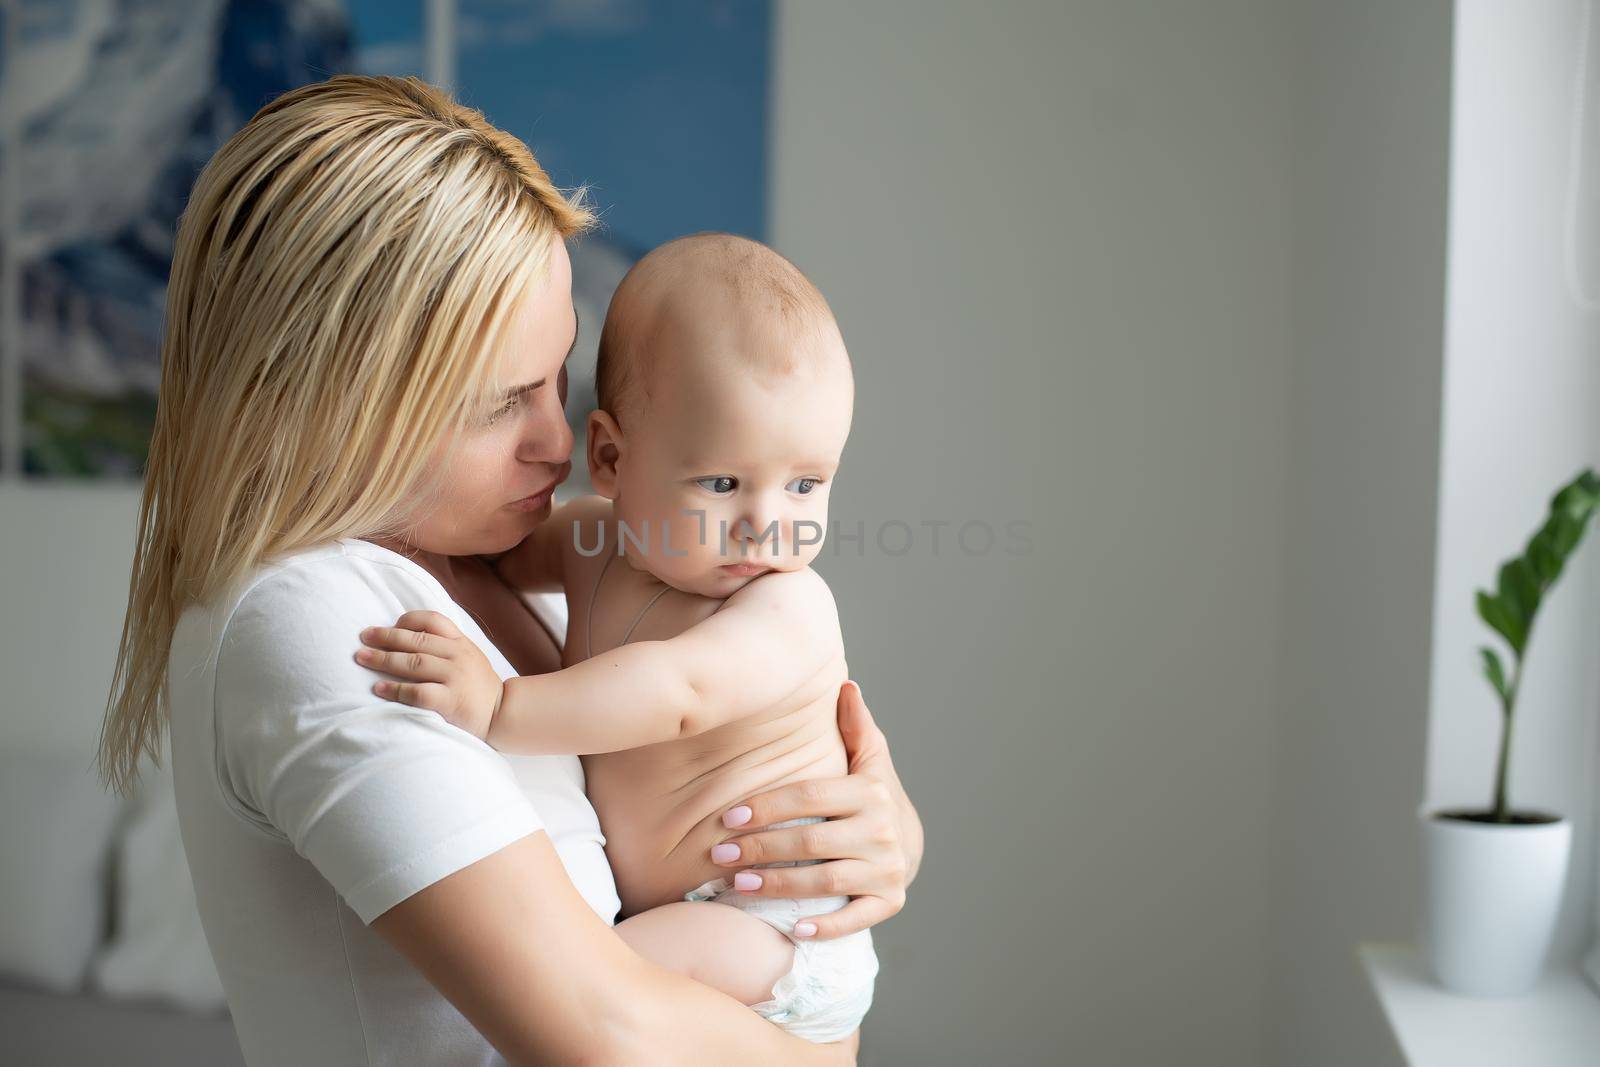 A young mother is holding her newborn baby. Mother of a nursing baby. Mother breastfeeding her baby. The family is at home. Portrait of a happy mother and child.